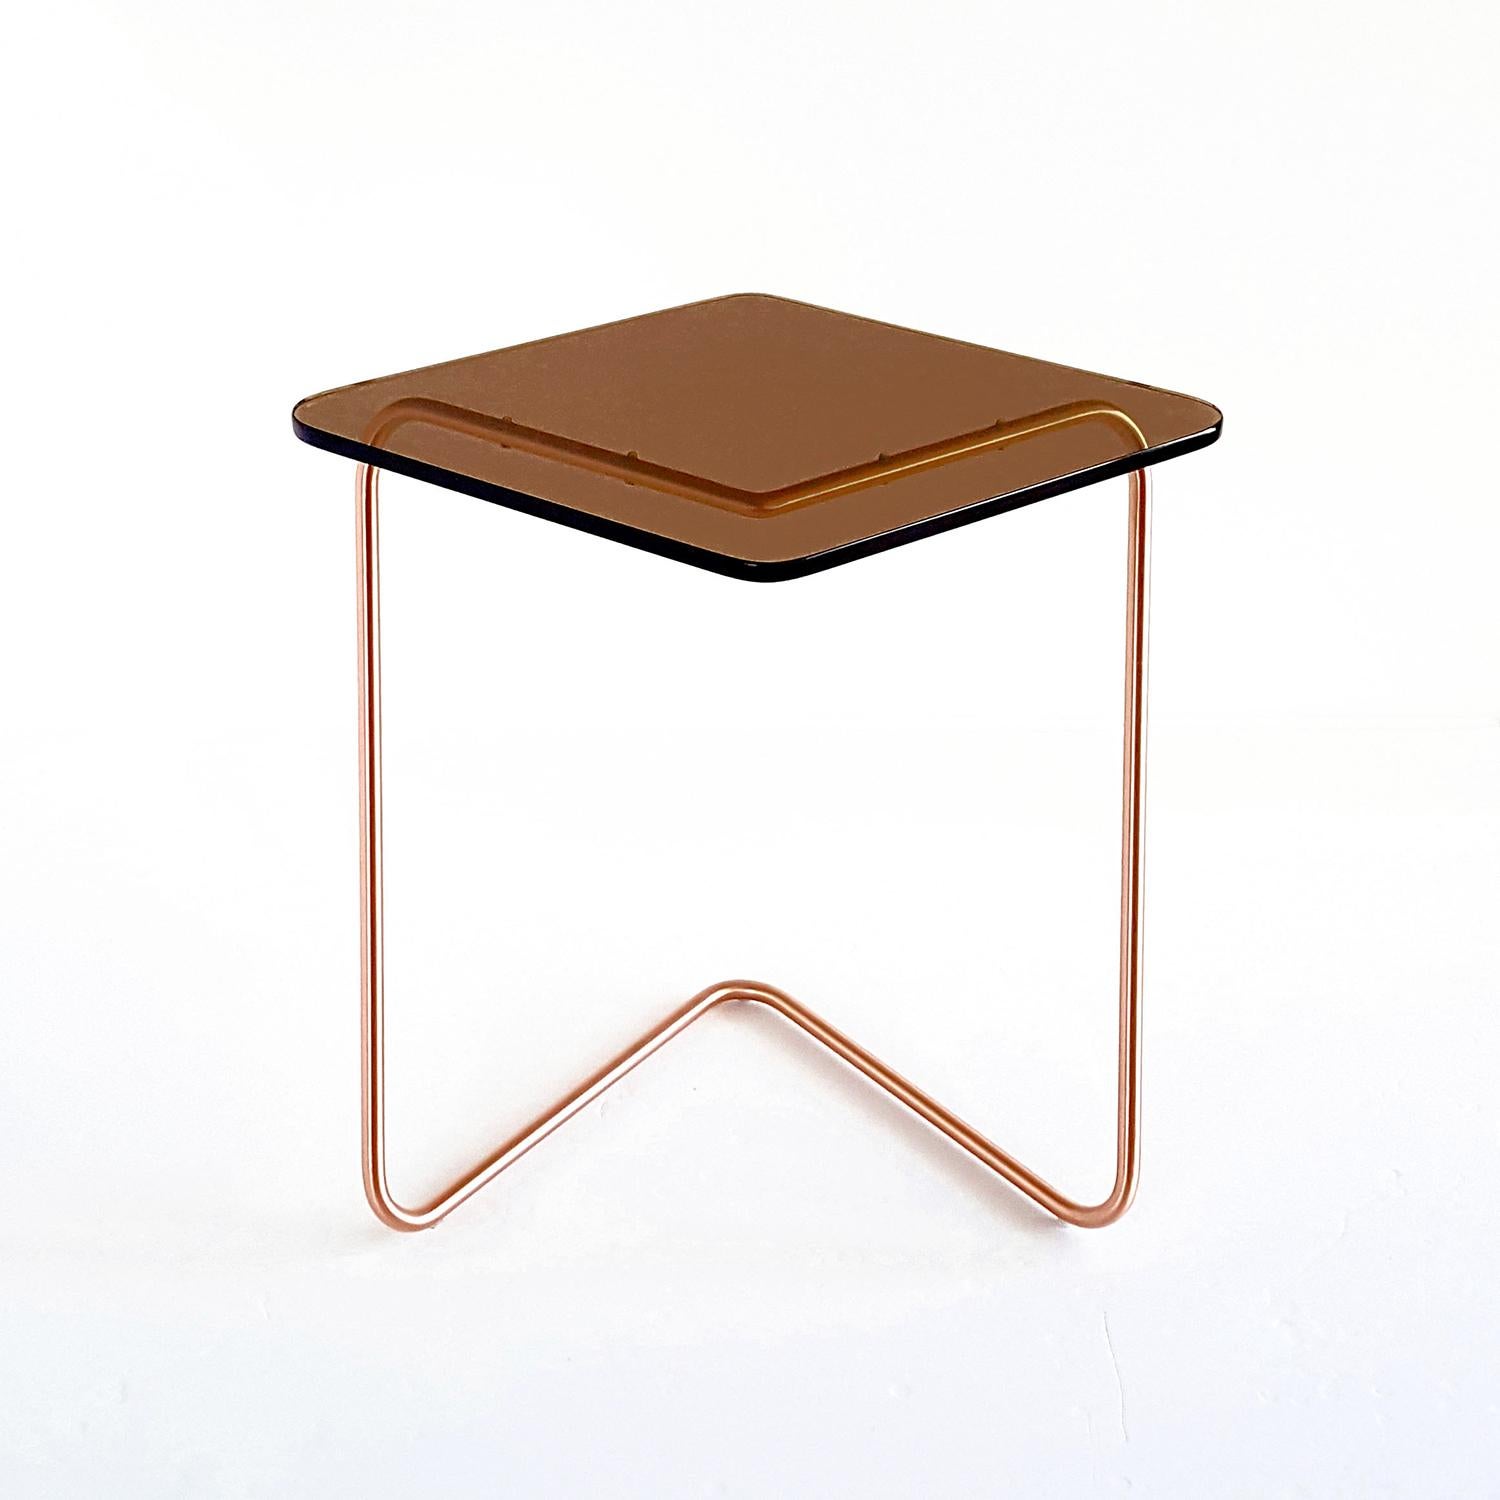 The Diamond side table by Rita Kettaneh 
Dimensions: The base: brushed stainless steel plated with copper
 optionally plated with copper or brass
 The top: acrylic
Materials: H 42 x W 45 x D 34.5 cm
Weight: 2.65 Kg

Colors and Finishes: